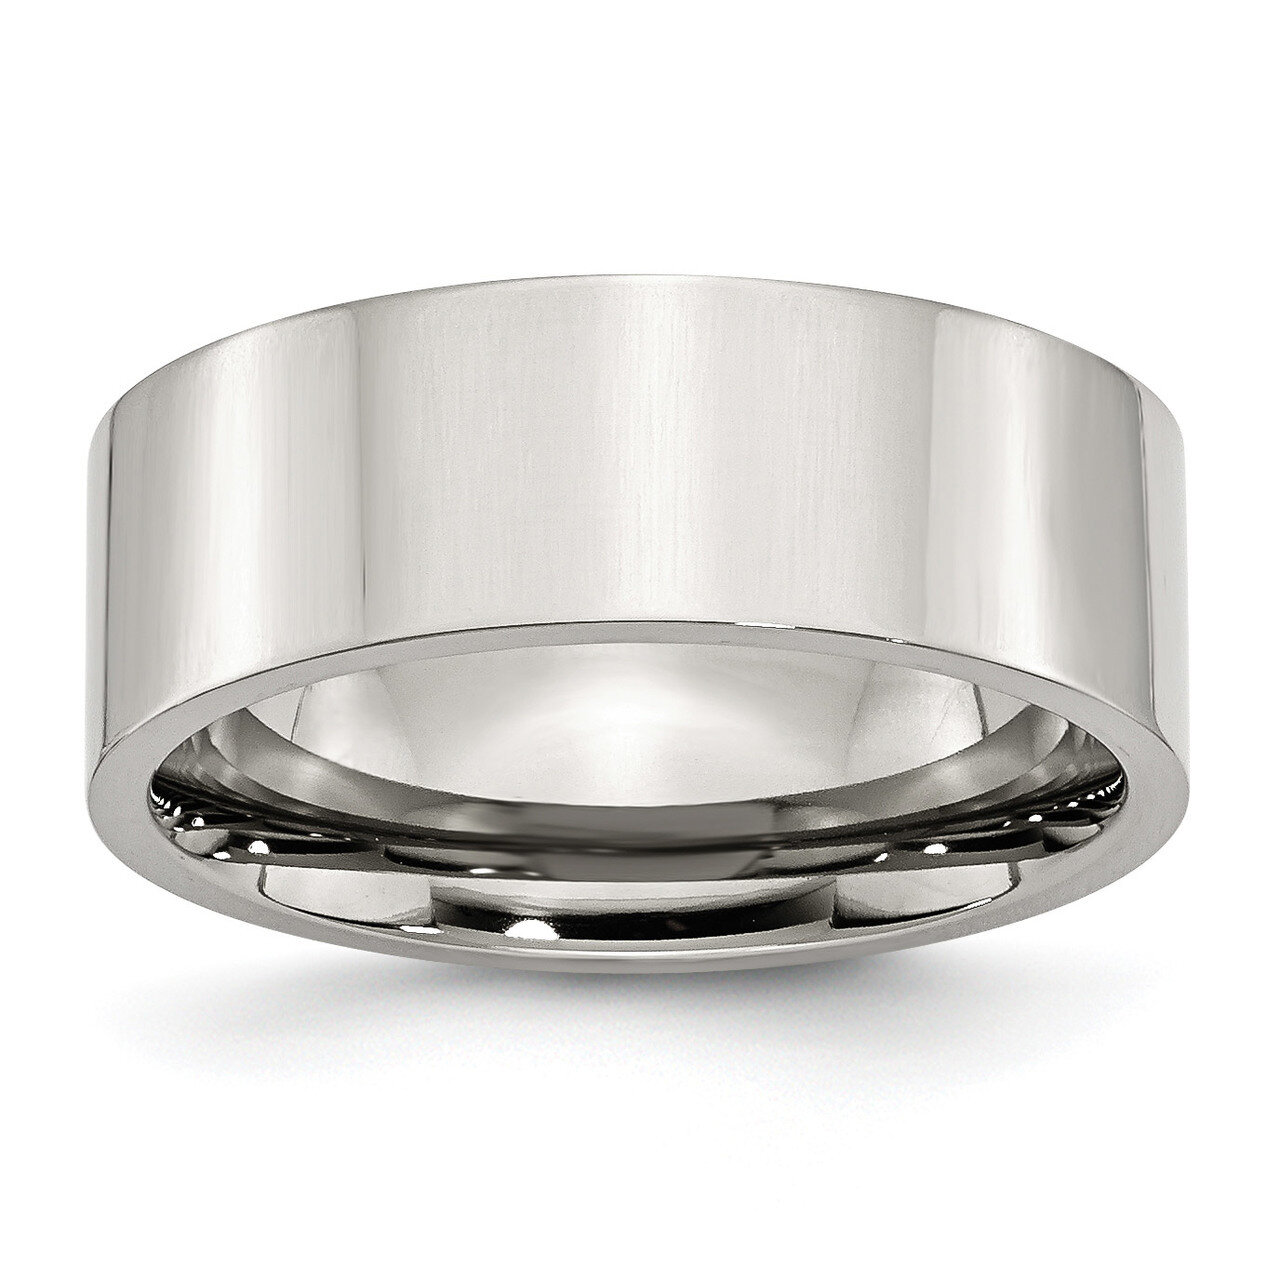 Flat 8mm Polished Band Stainless Steel SR9 Engravable